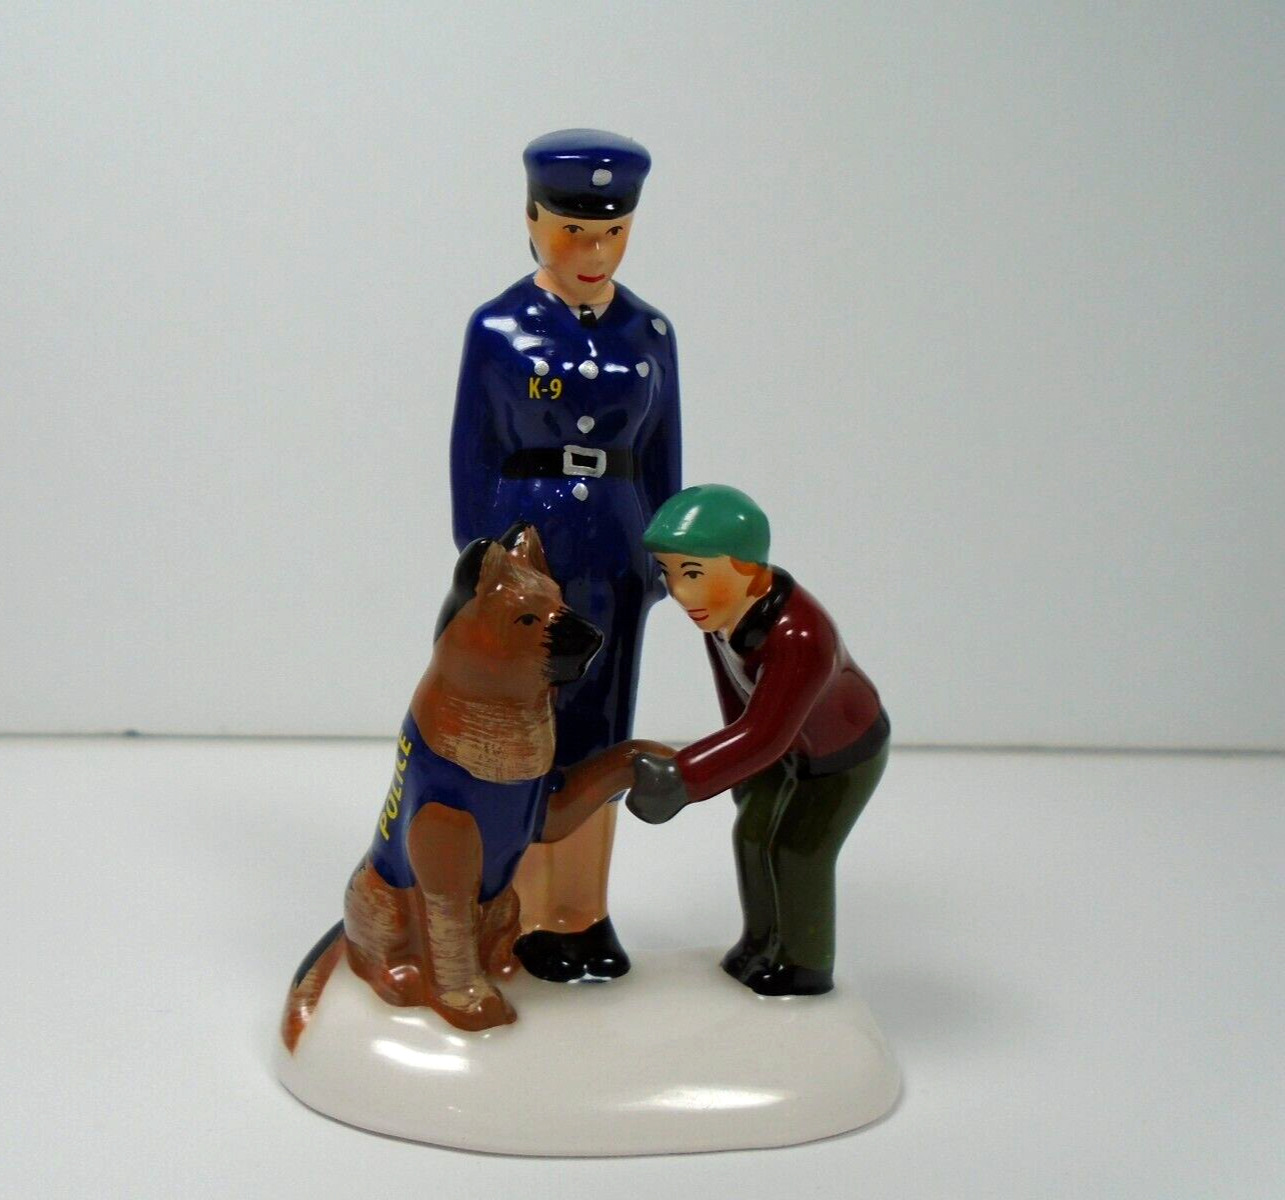 DEPARTMENT 56 SNOW VILLAGE SHAKEDOWN POLICEWOMAN WITH K-9 AND BOY